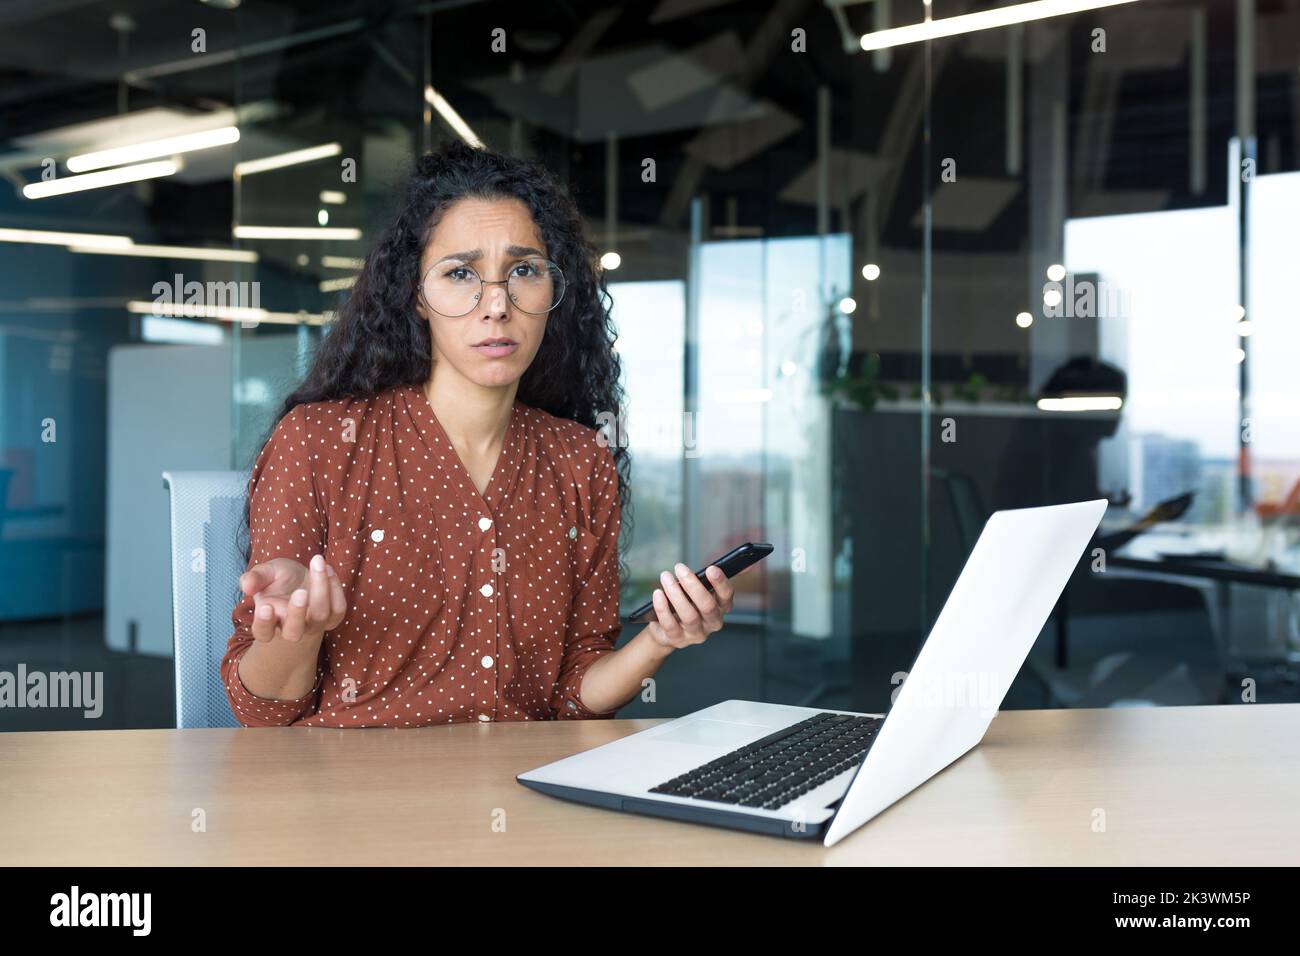 Frustrated and sad business woman with phone in hands looking at camera, latin american woman working with laptop inside modern office building, unclear emotional state of female employee. Stock Photo